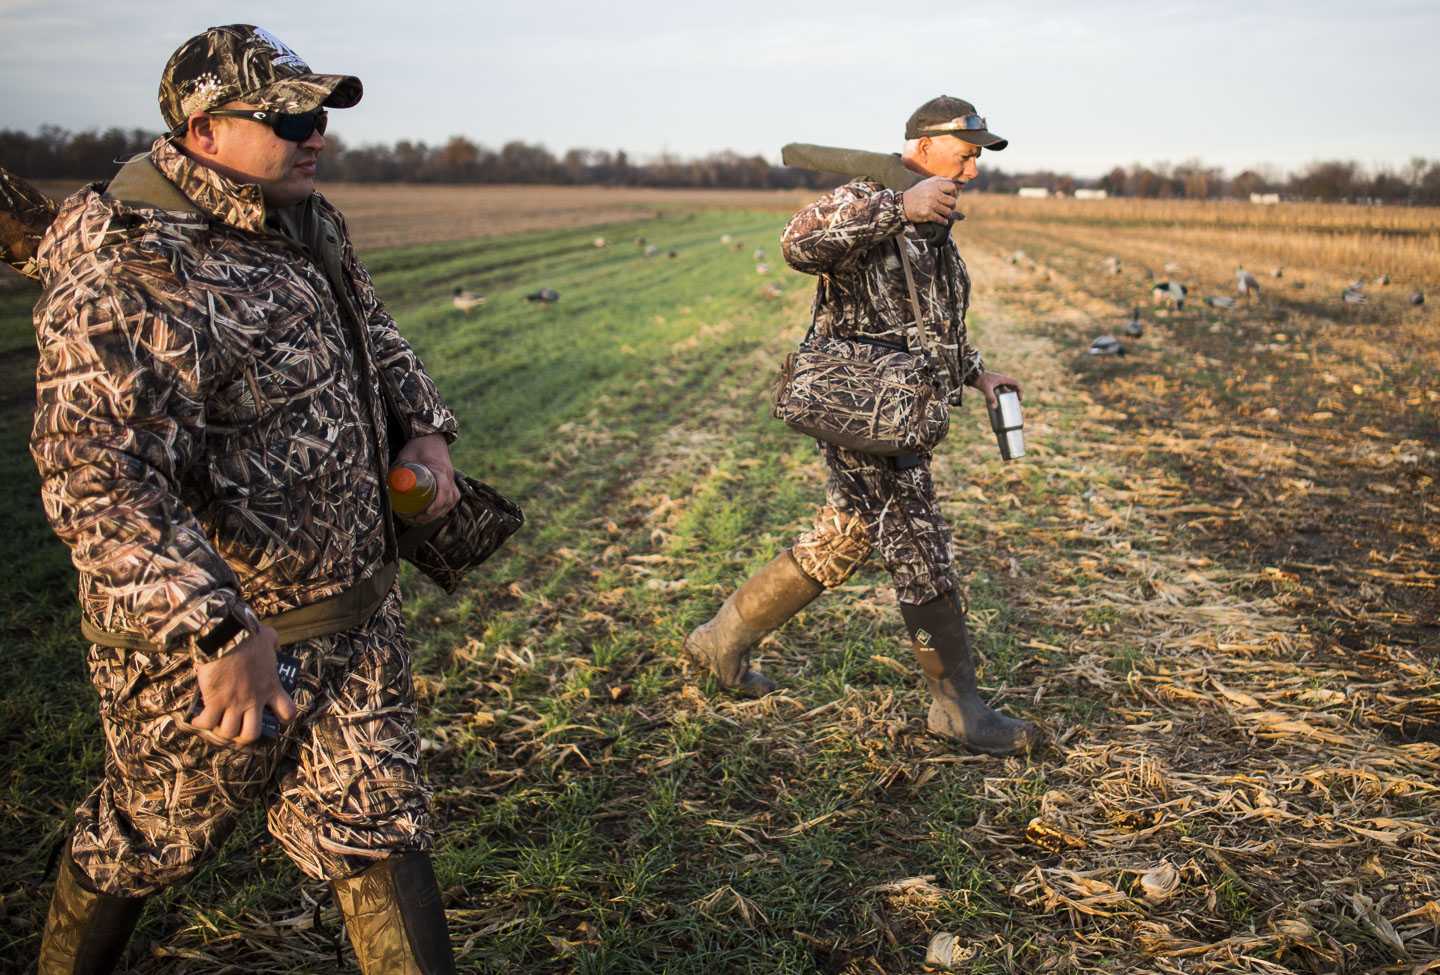 Grassy Lake Hunting Club guide Duane Smith, right, and John Thomas, of Nashville, Tenn., make their way to a hunting blind Wednesday, Nov. 30, 2016, during a Wounded Warriors duck hunt in Jonesboro. (Ryan Michalesko | @photosbylesko)